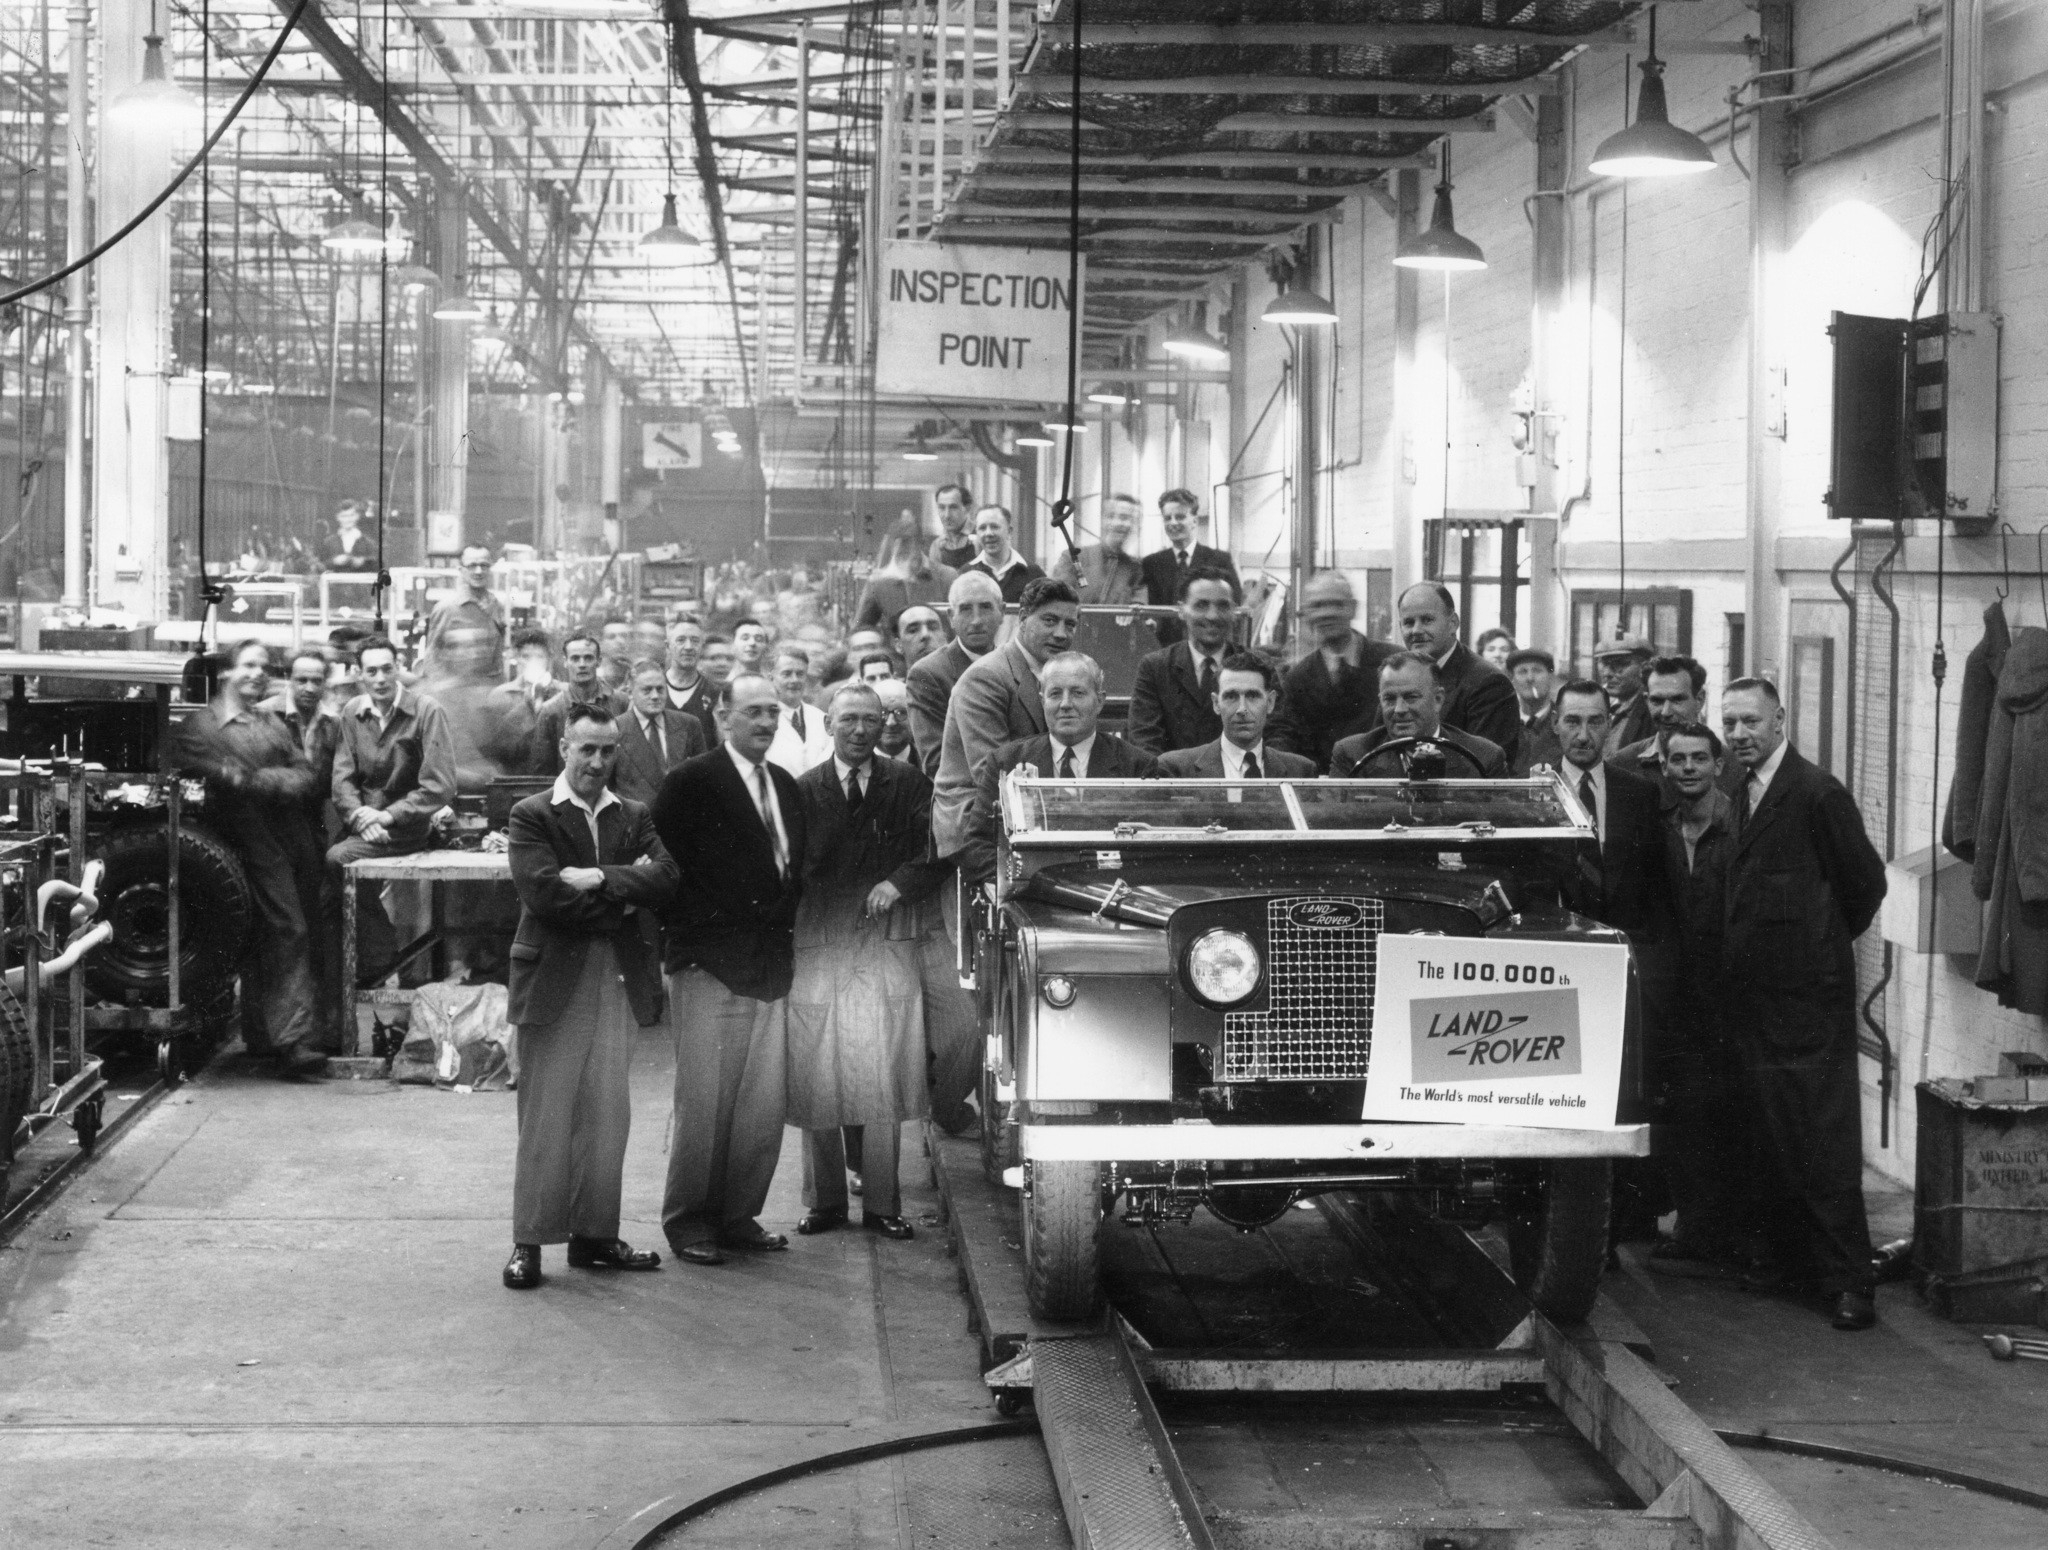 The 100,000th Series Land Rover rolls off the production line at Solihull in 1954